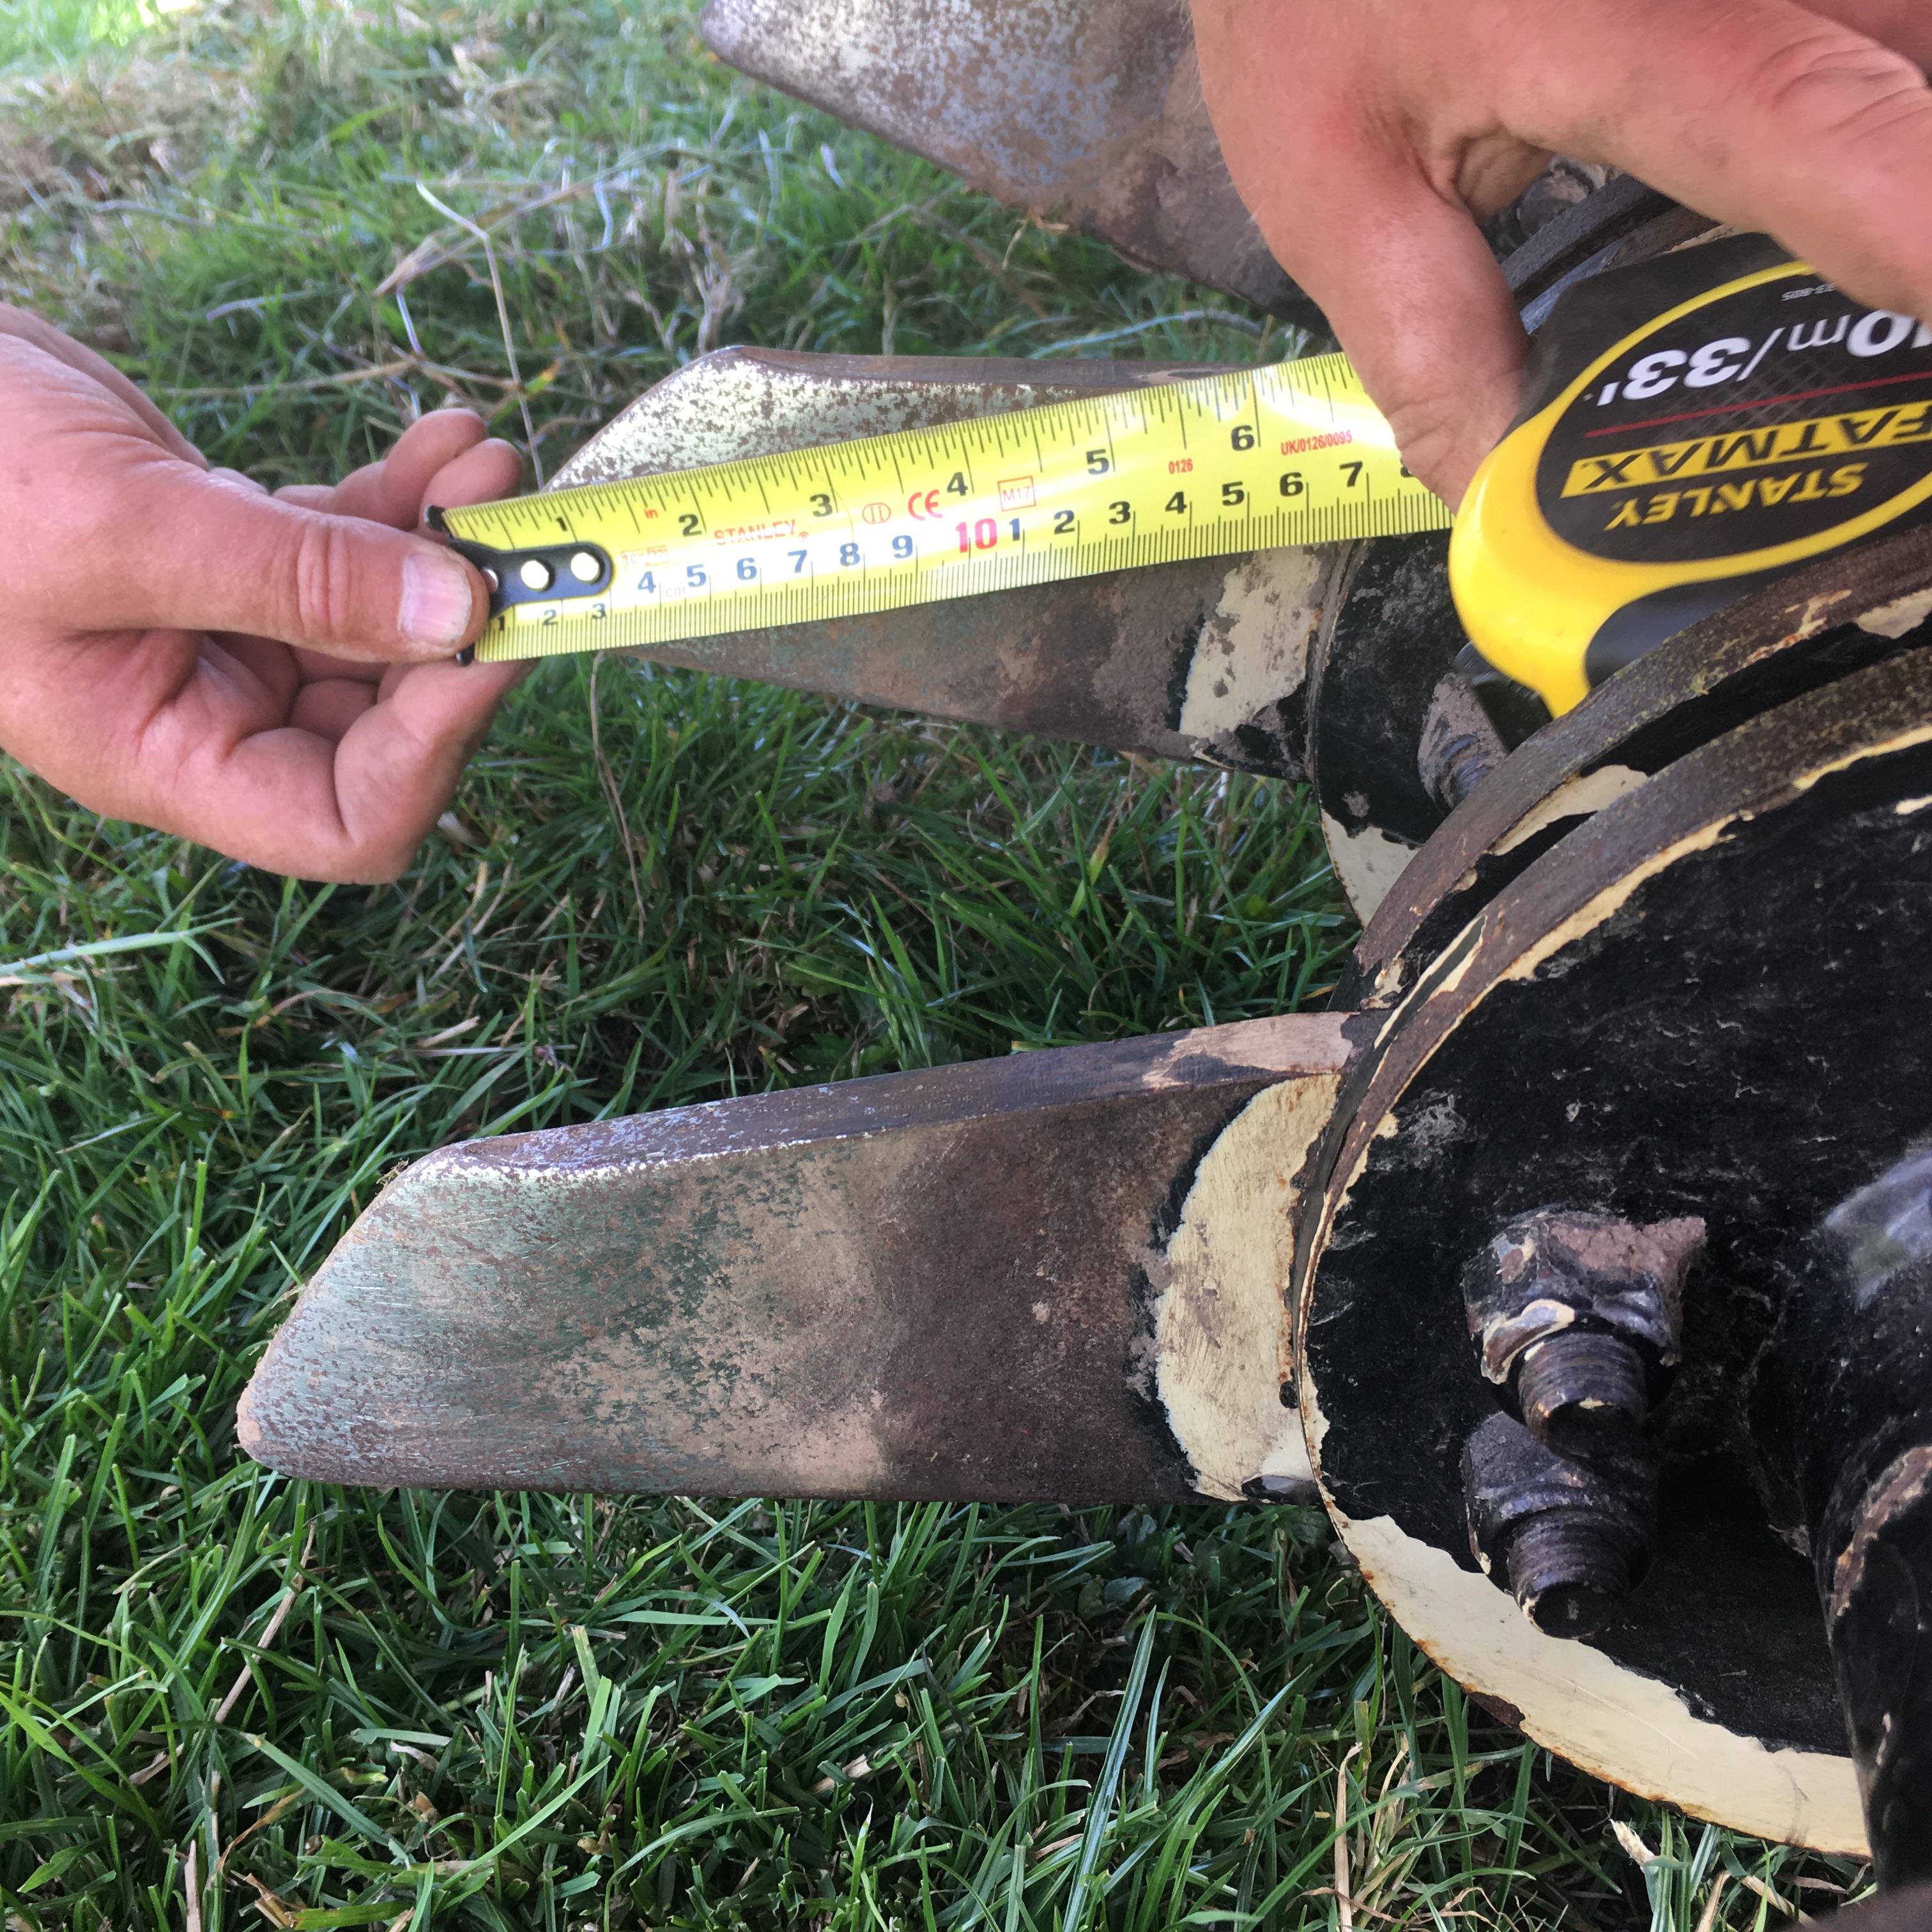 A photo of someone measuring the length of blade on a soil aerator with a yellow measuring tape